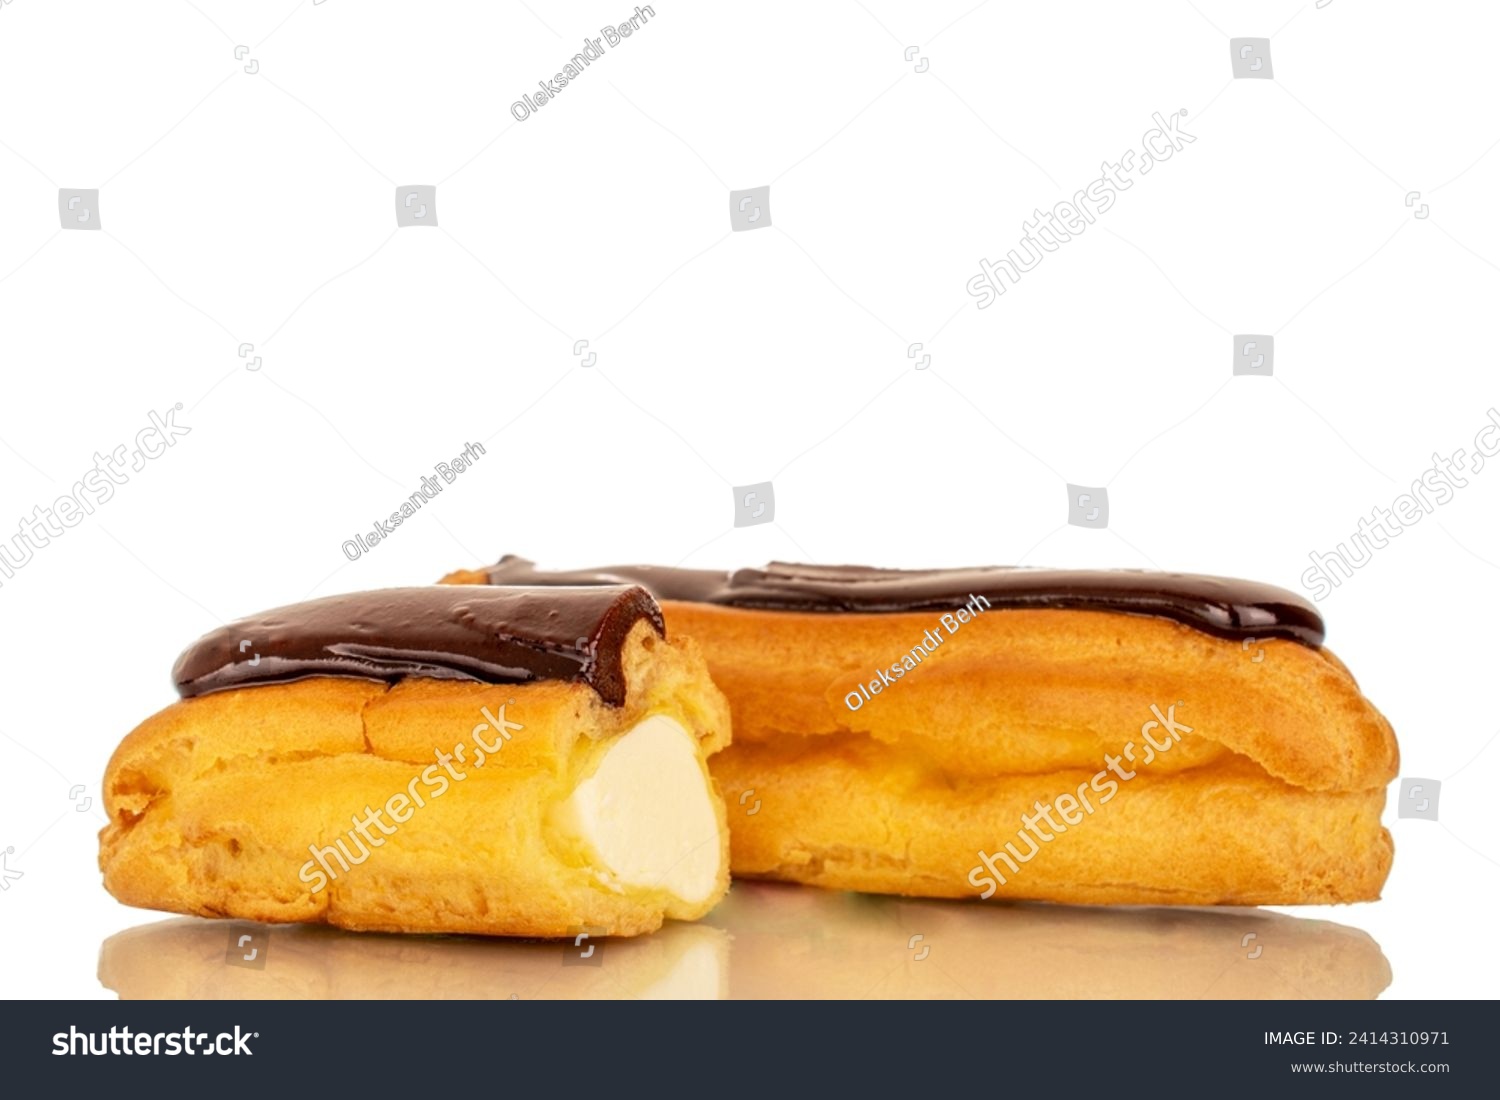 One whole and one half delicious chocolate eclair, close-up isolated on white. #2414310971